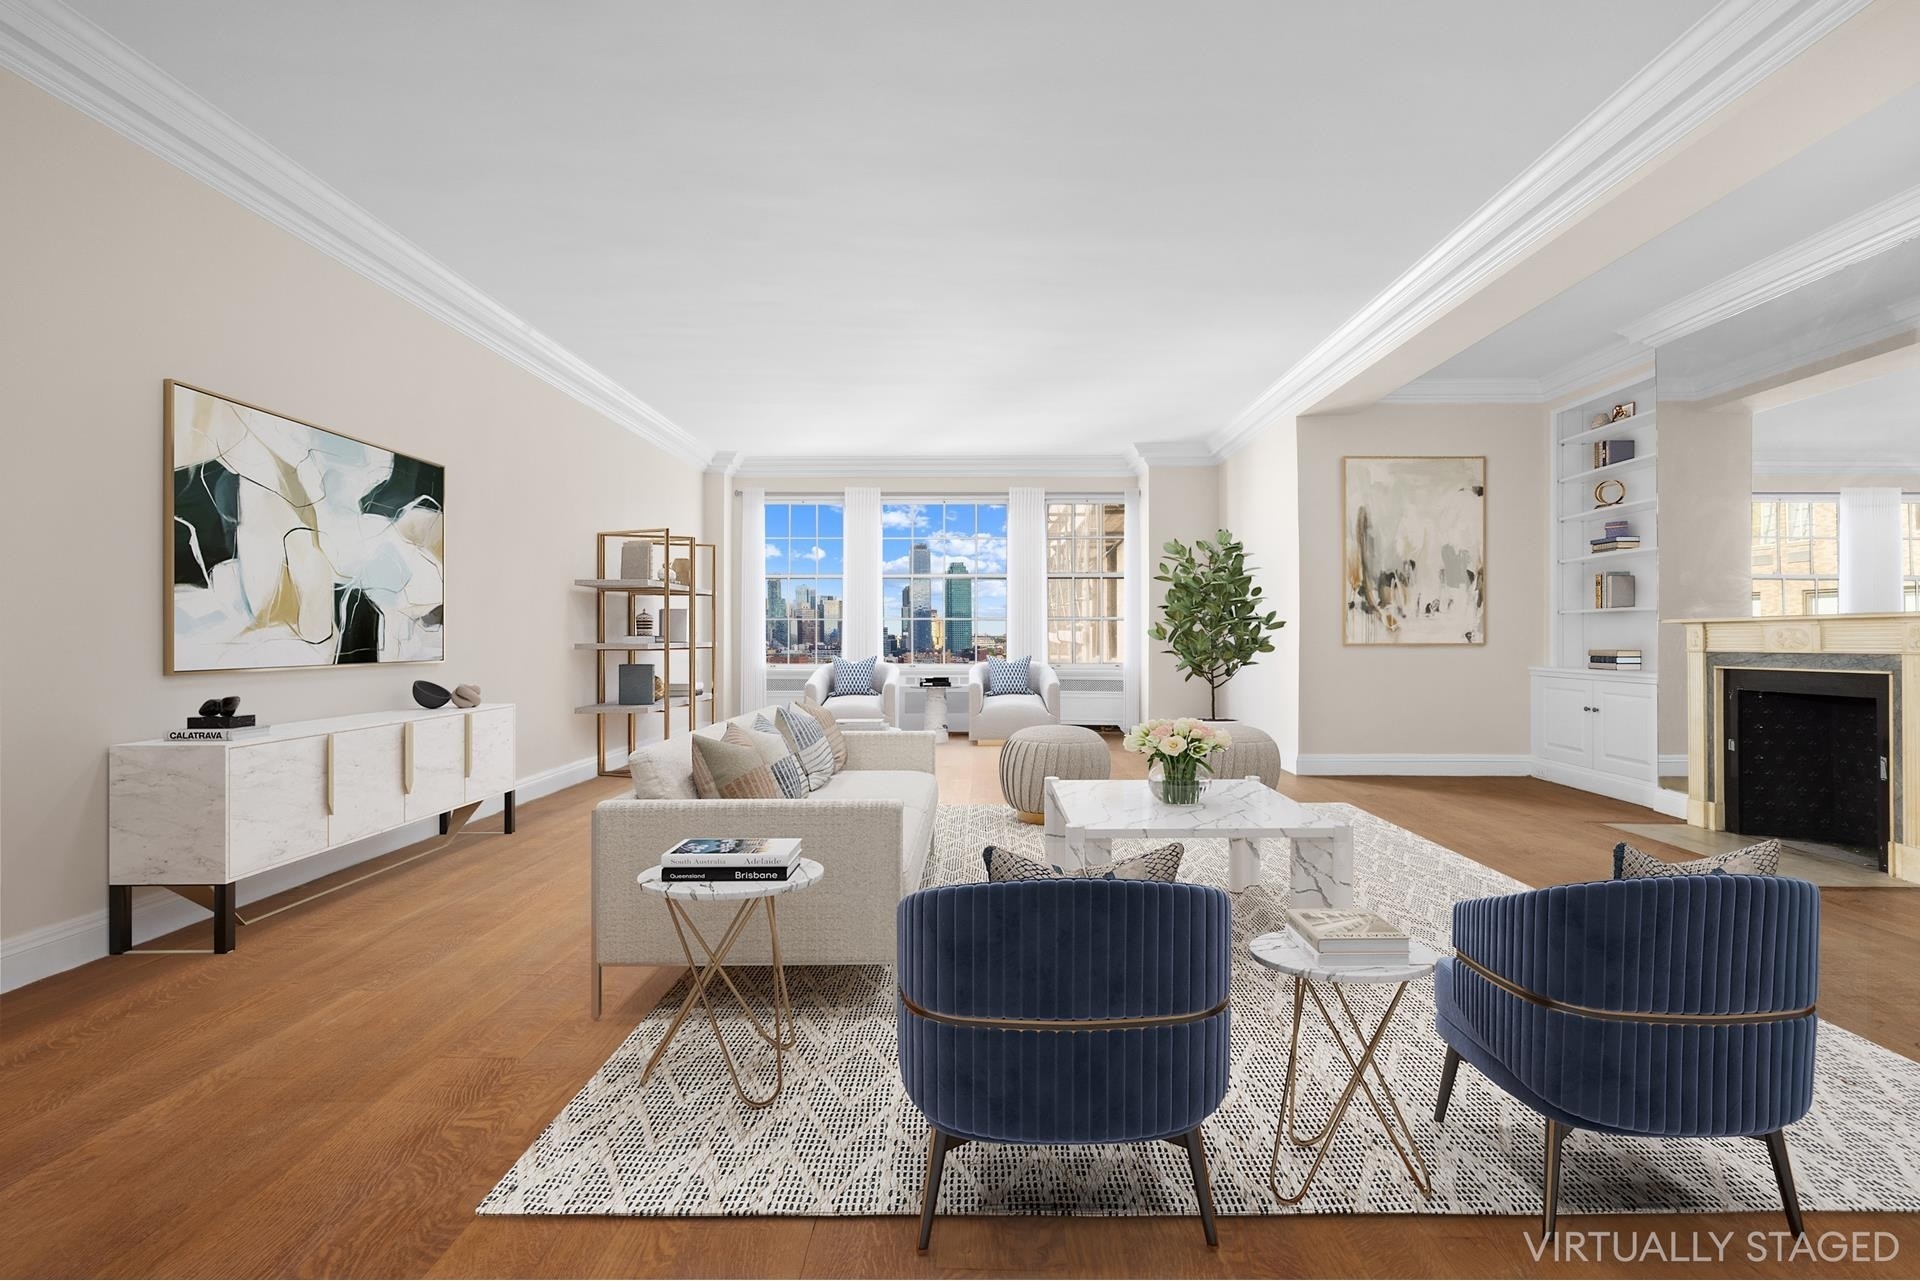 Co-op Properties for Sale at RIVER HOUSE, 435 E 52ND ST, 13B Beekman, New York, NY 10022